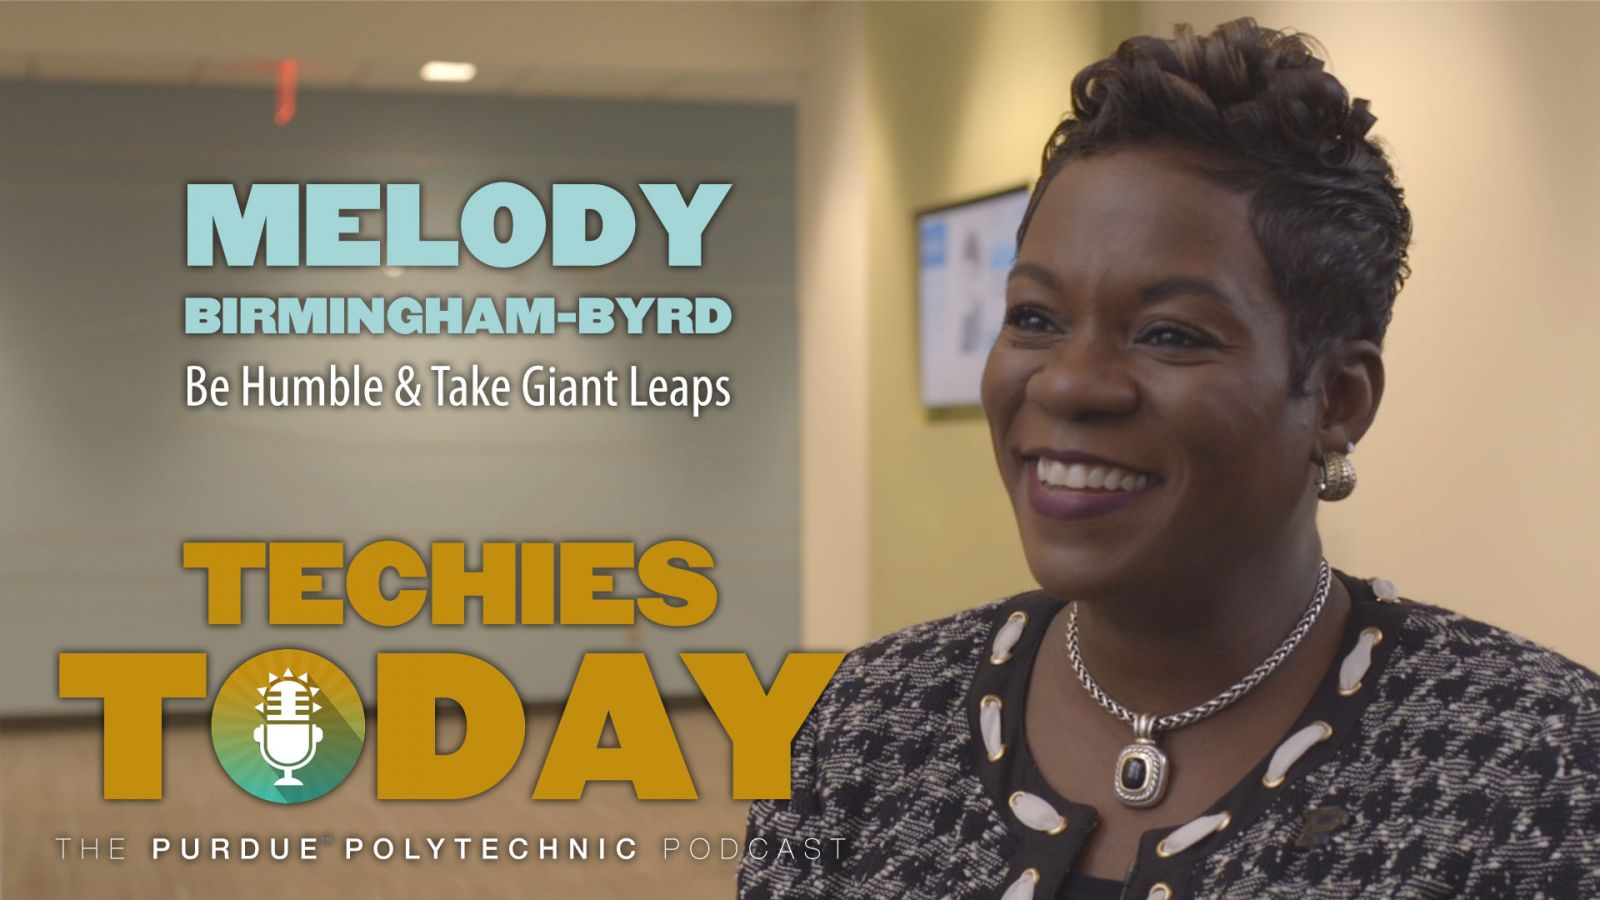 Melody Birmingham-Byrd, Be Humble & Take Giant Leaps, on Techies Today, the Purdue Polytechnic Podcaxts